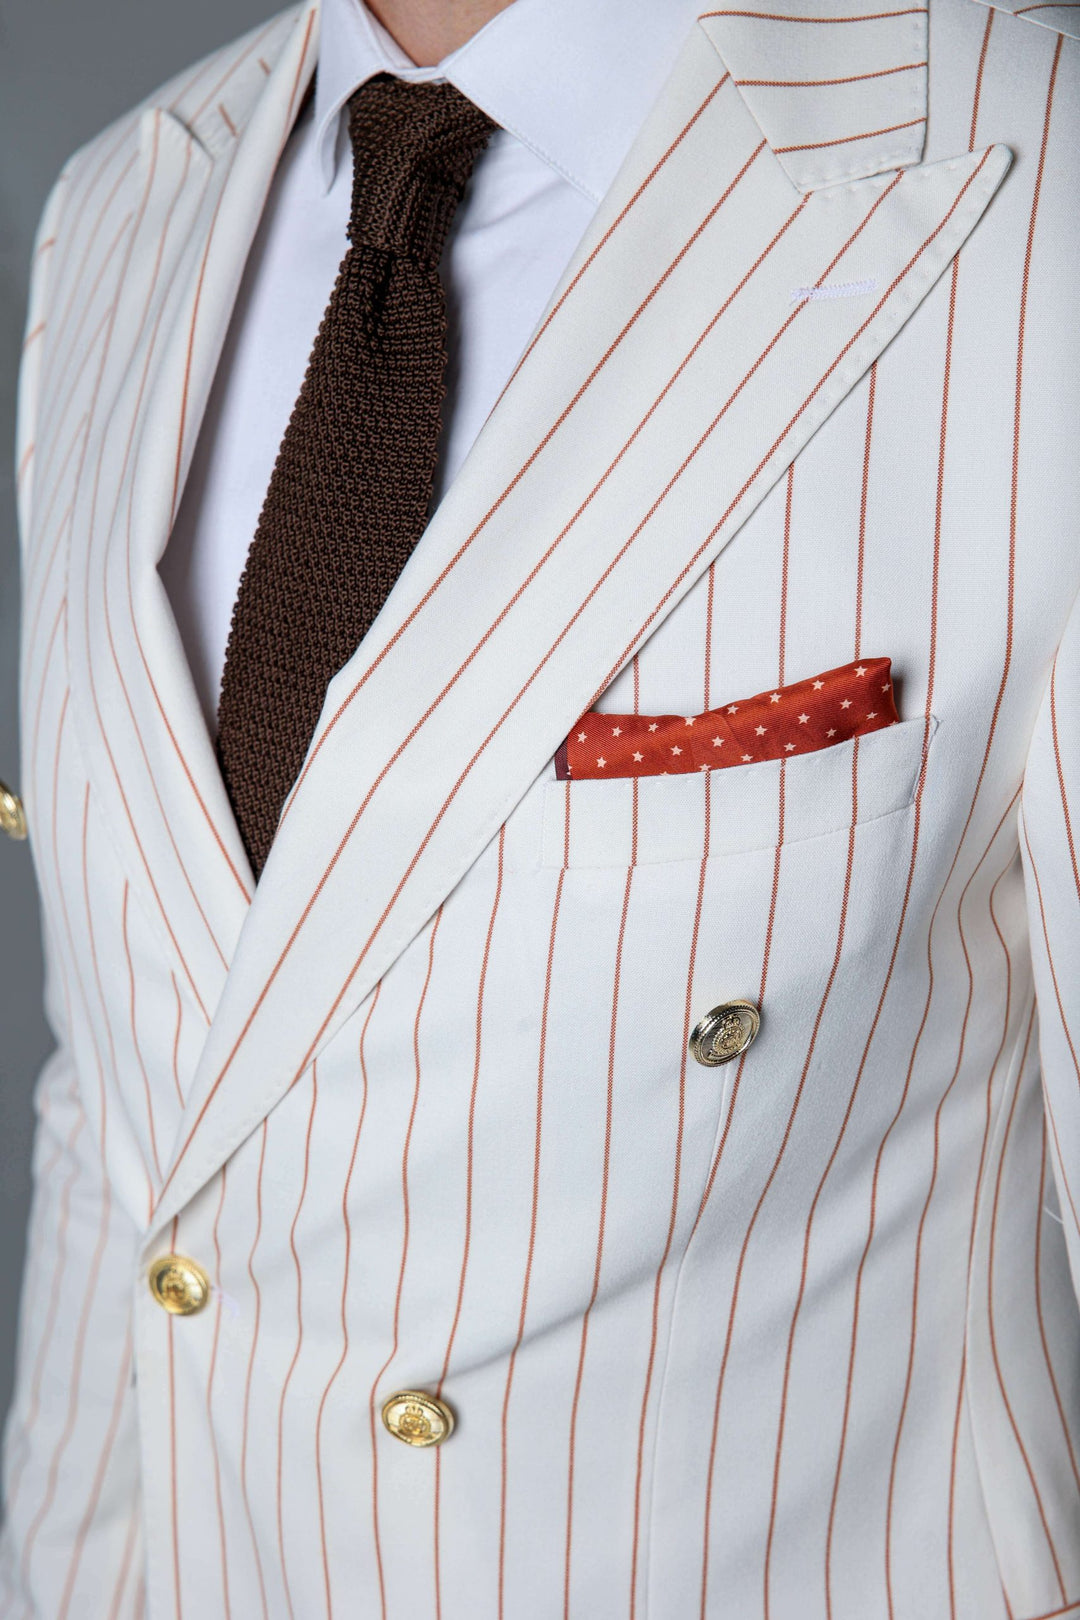 Two-piece white suit with double-breasted jacket and stripes